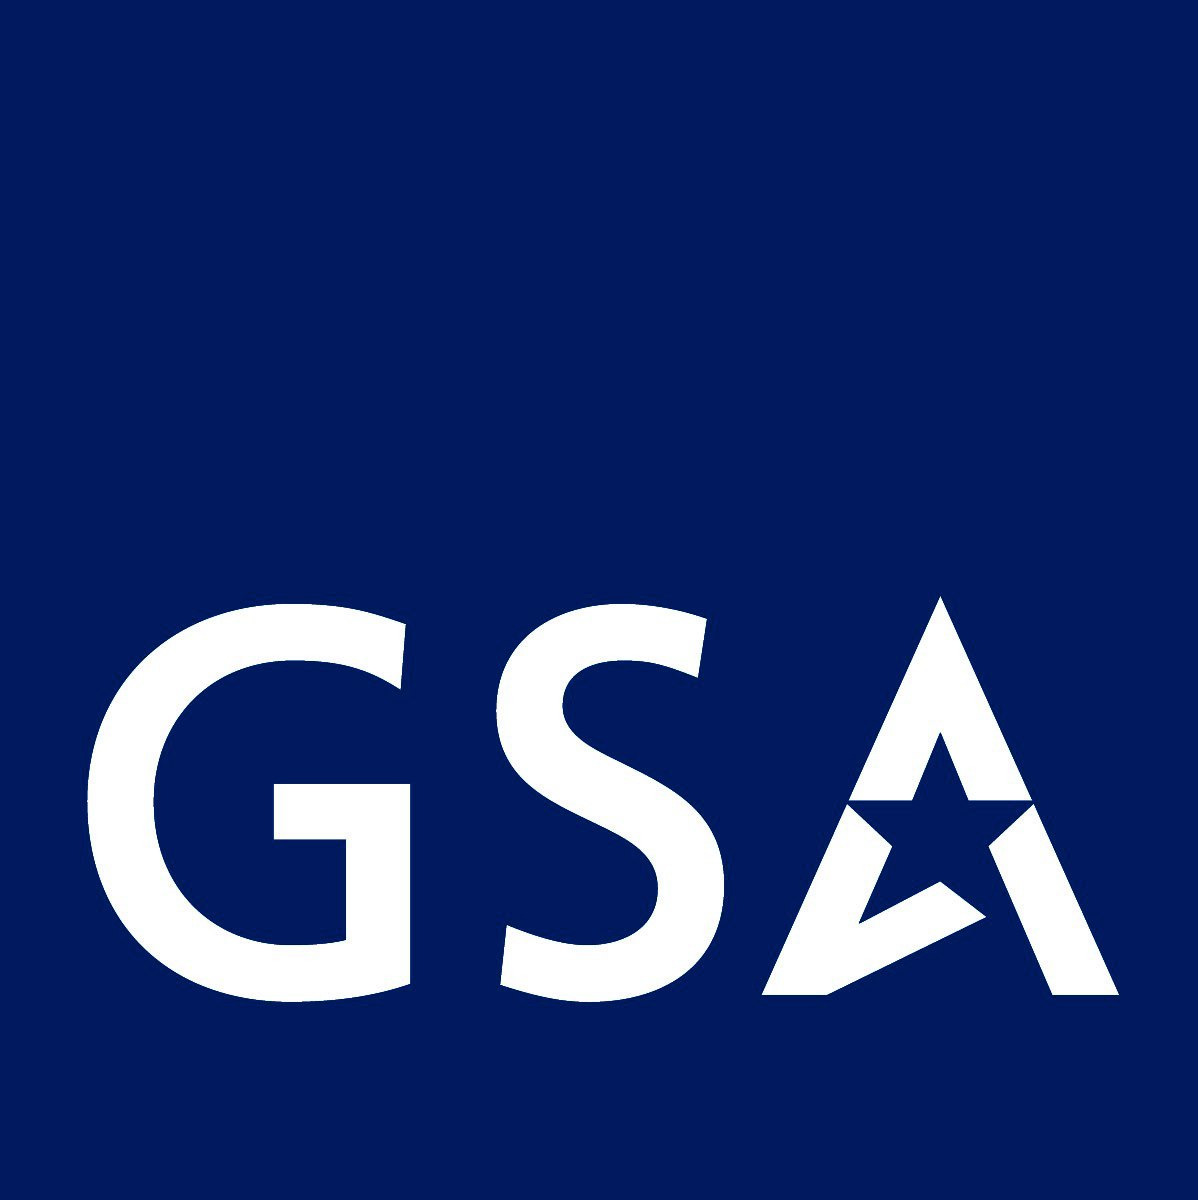 GSA Seeks to Expand Role despite Tighter Budgets